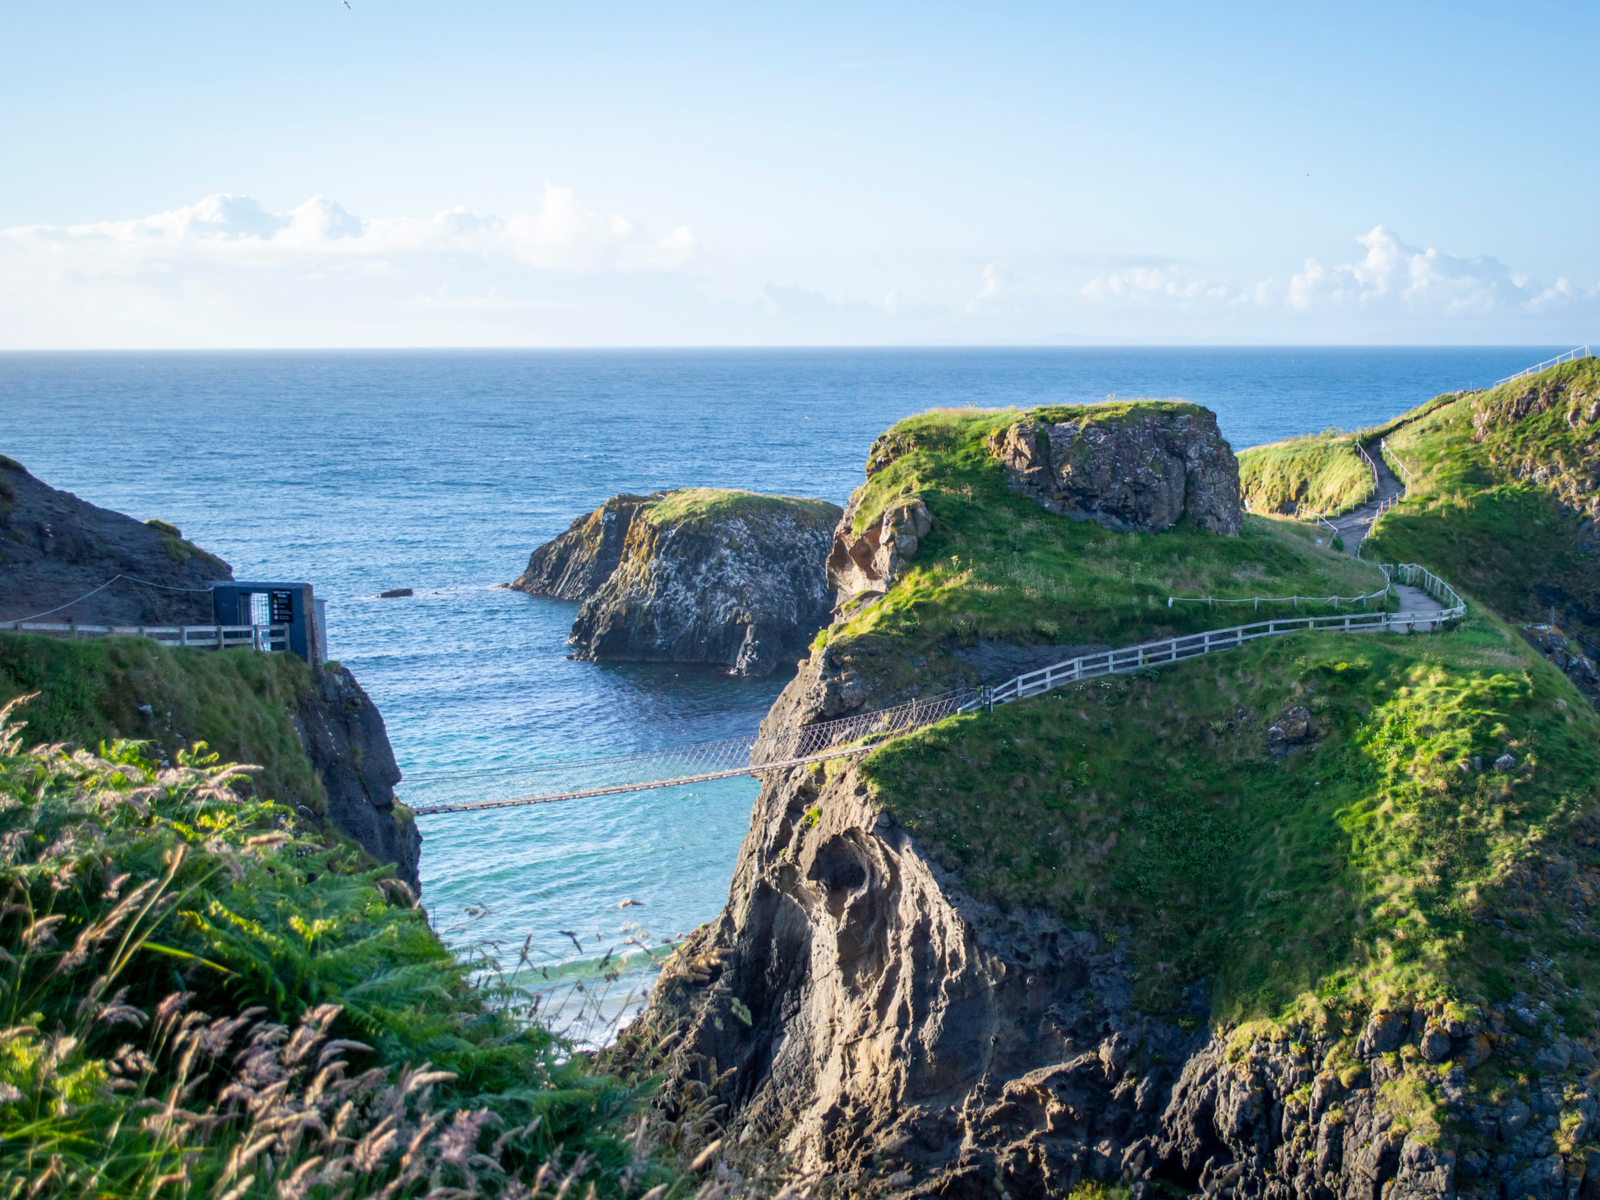 The famous Carrick-a-Rede Rope Bridge and a winding coastal trail at the calm Causeway Coast is one of the best hikes in Ireland